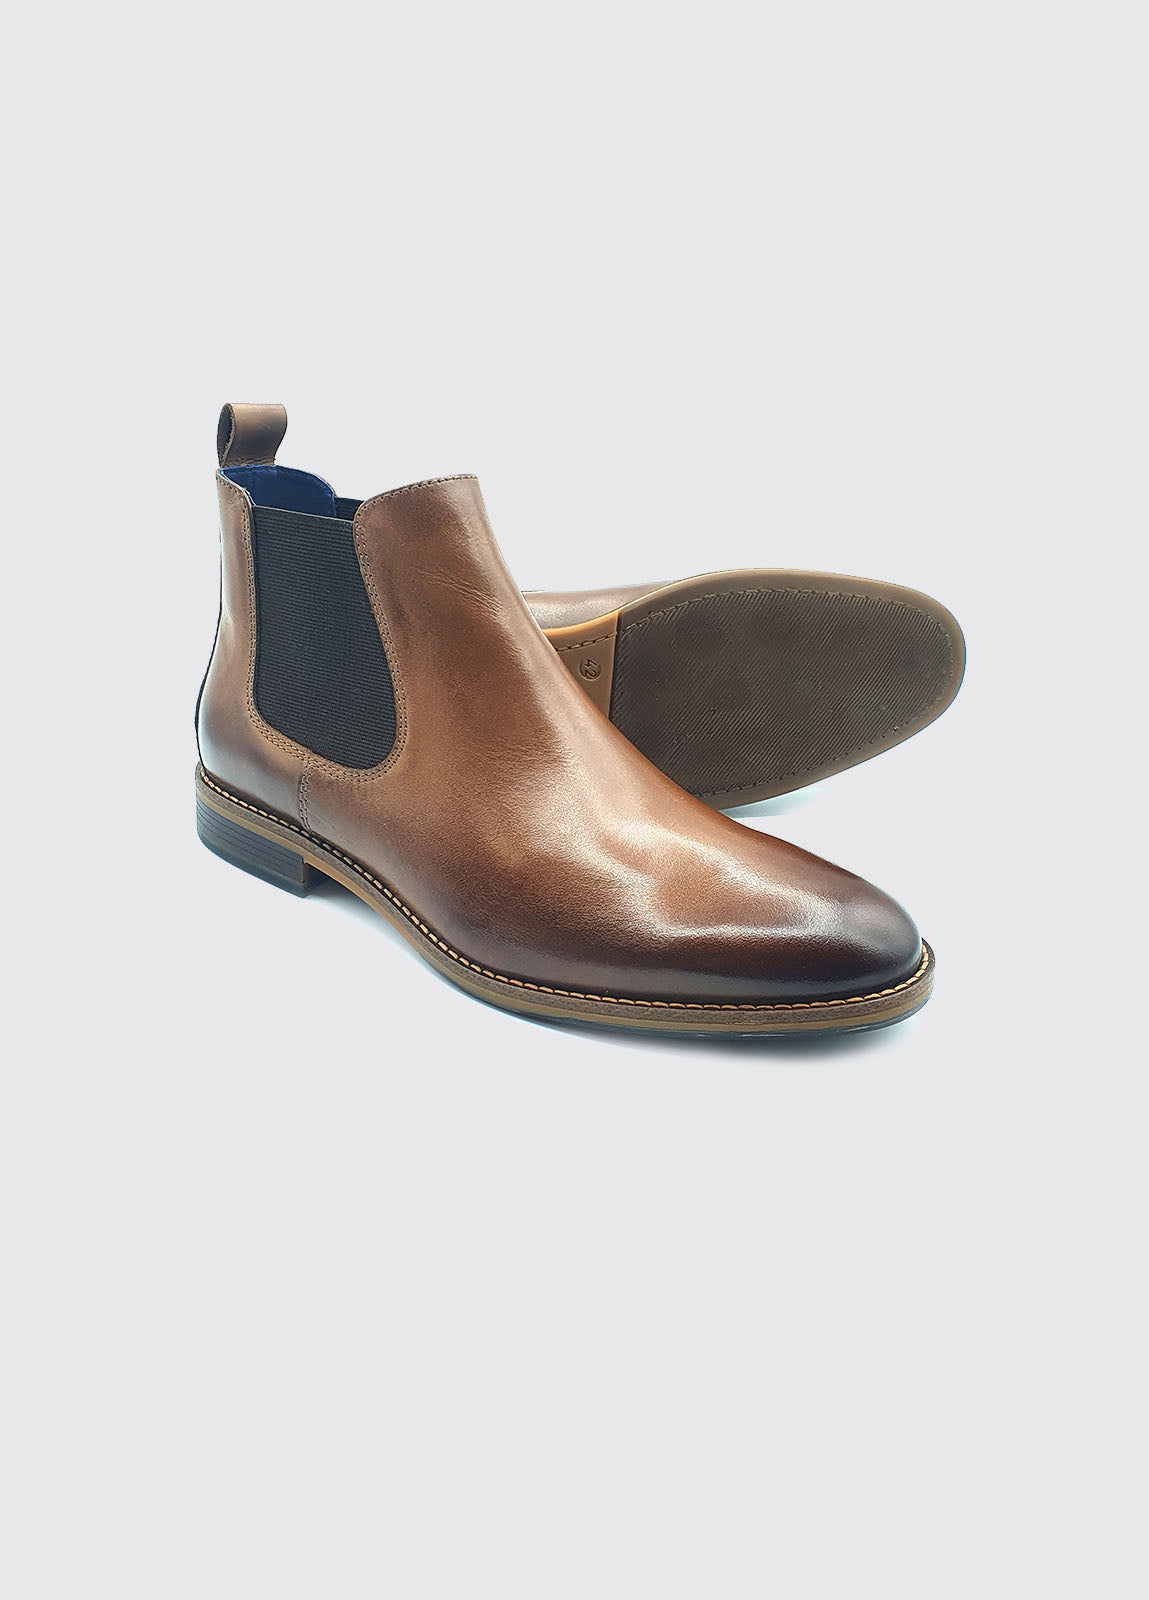 Men's Steed Slip on Tan Boot-Sole View